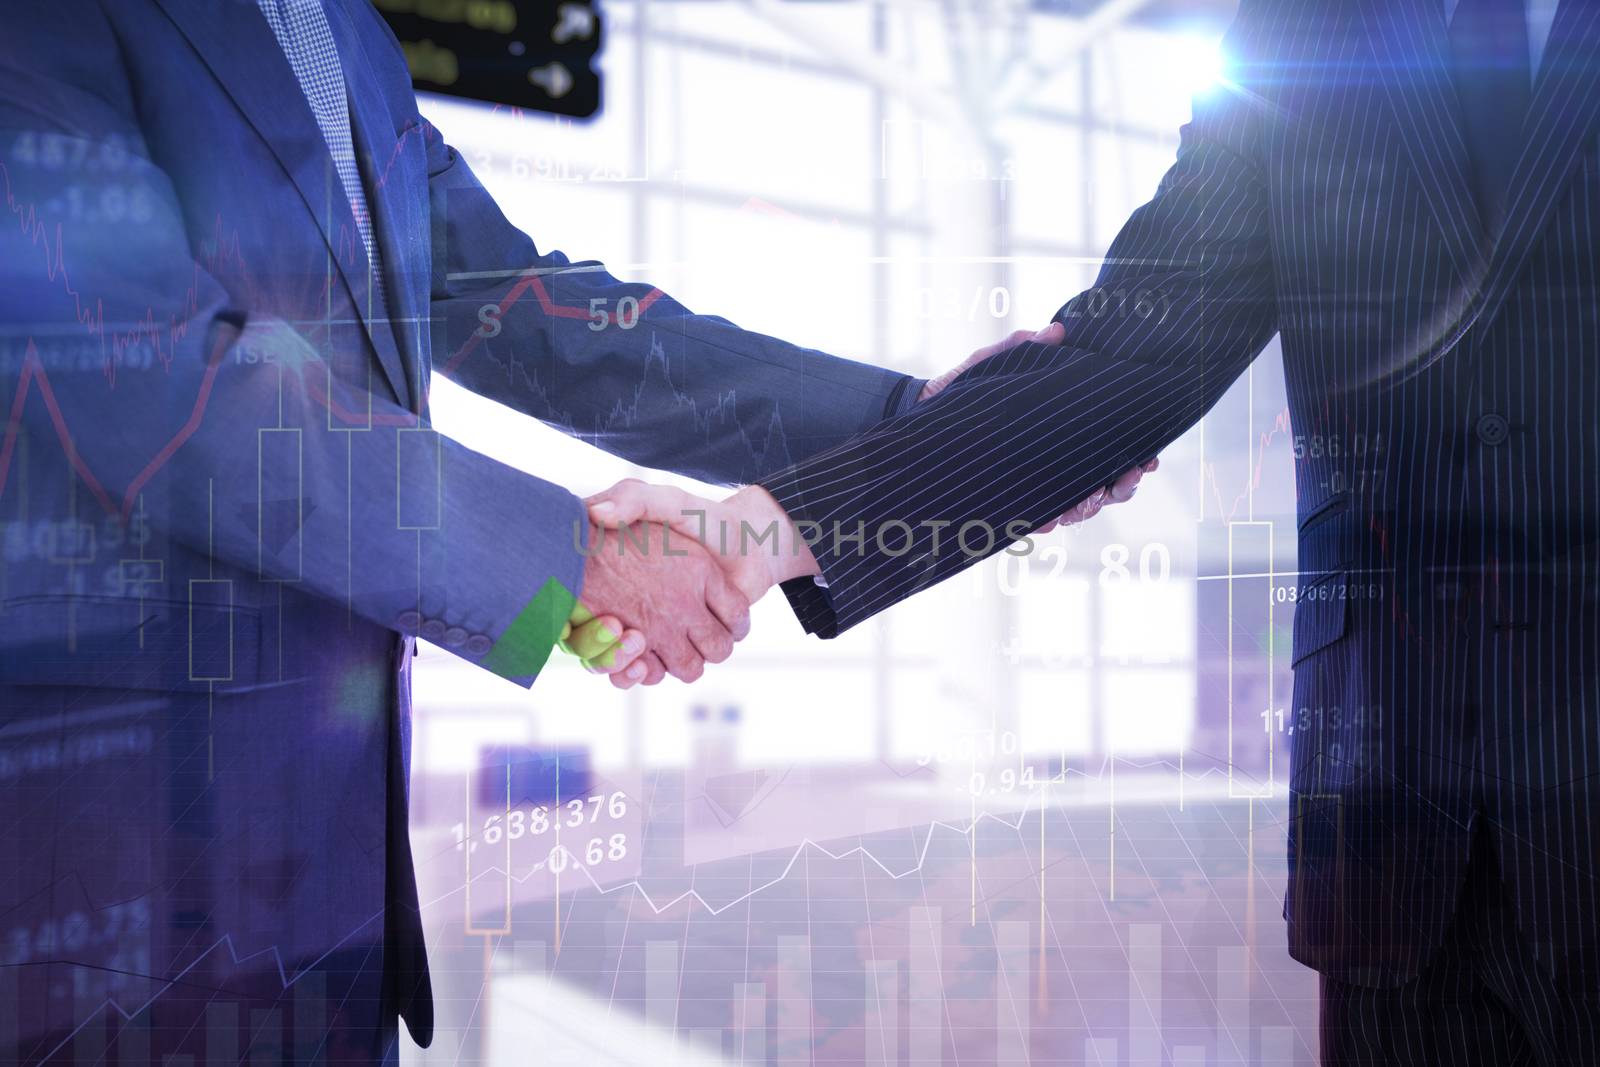 Handshake in agreement against stocks and shares